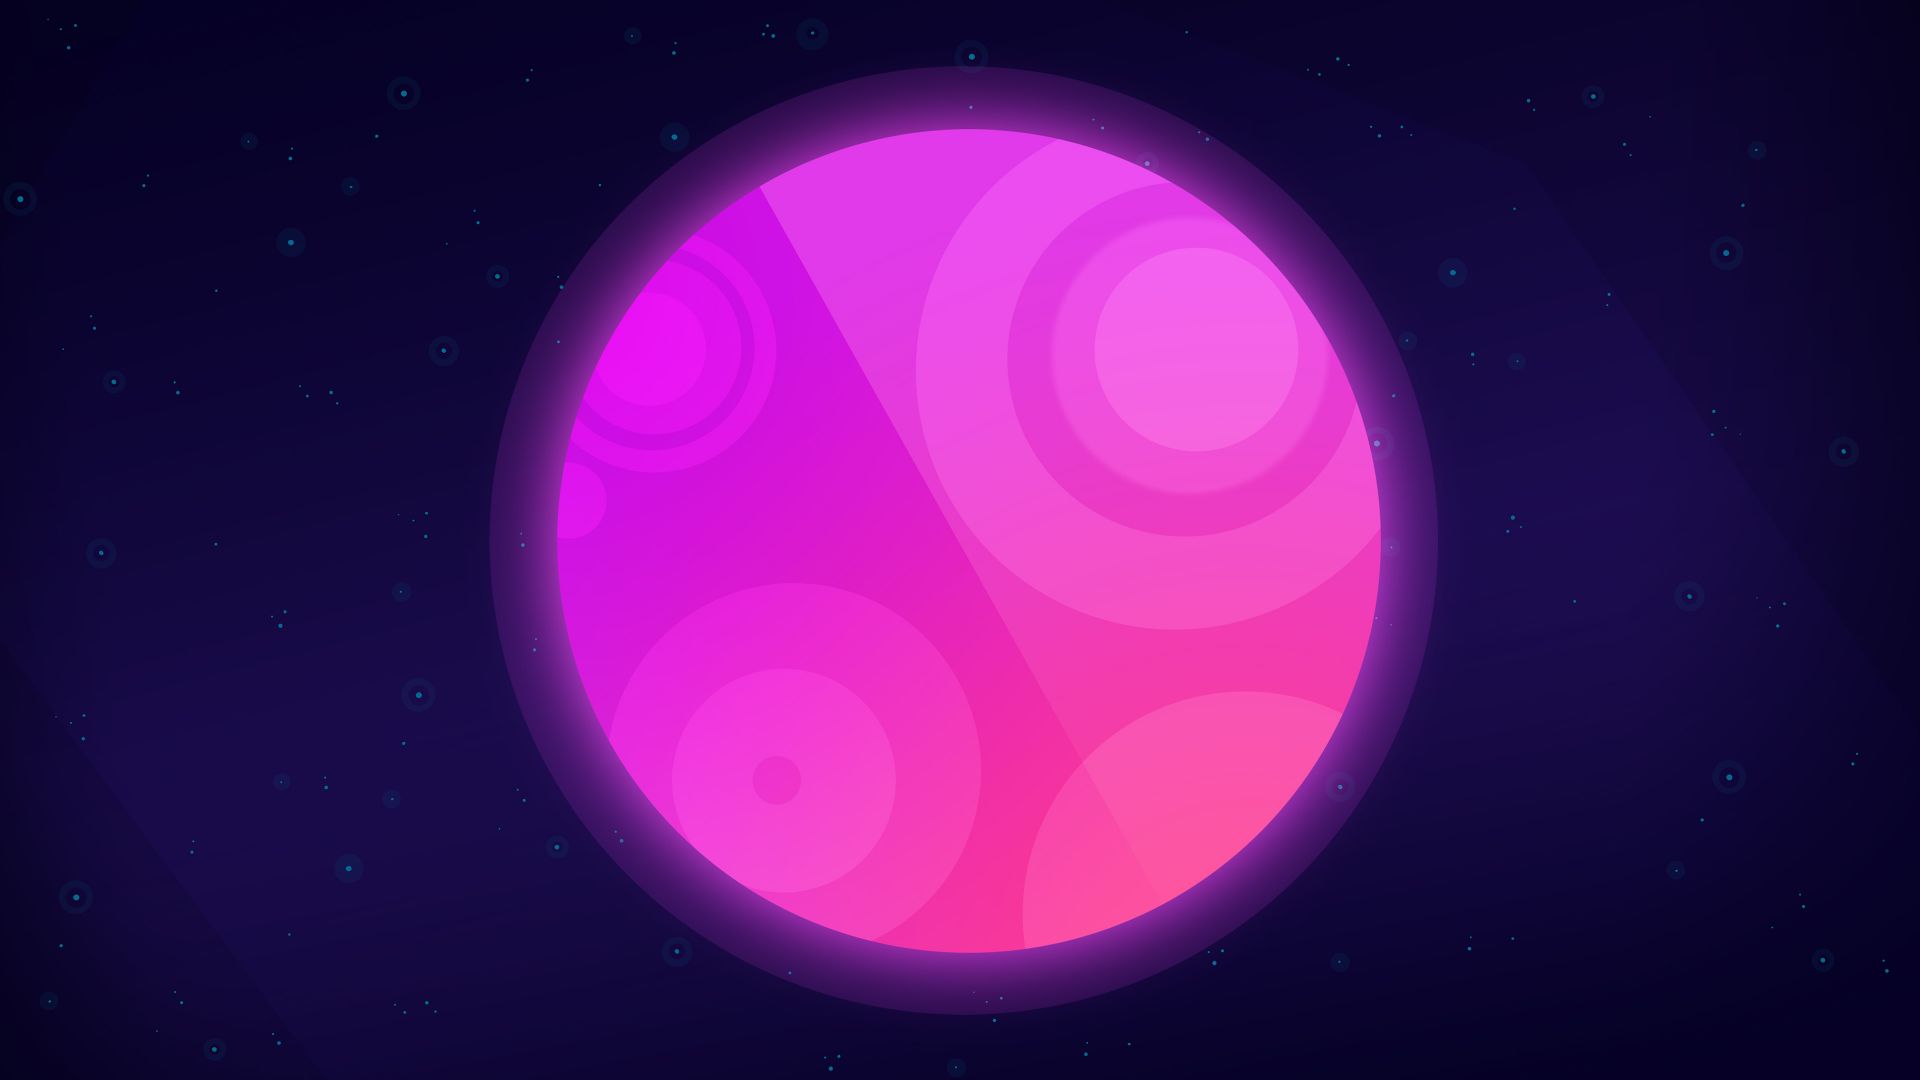 Moon, neon, pink planet, abstract, space wallpaper, HD image, picture, background, 1fe6df